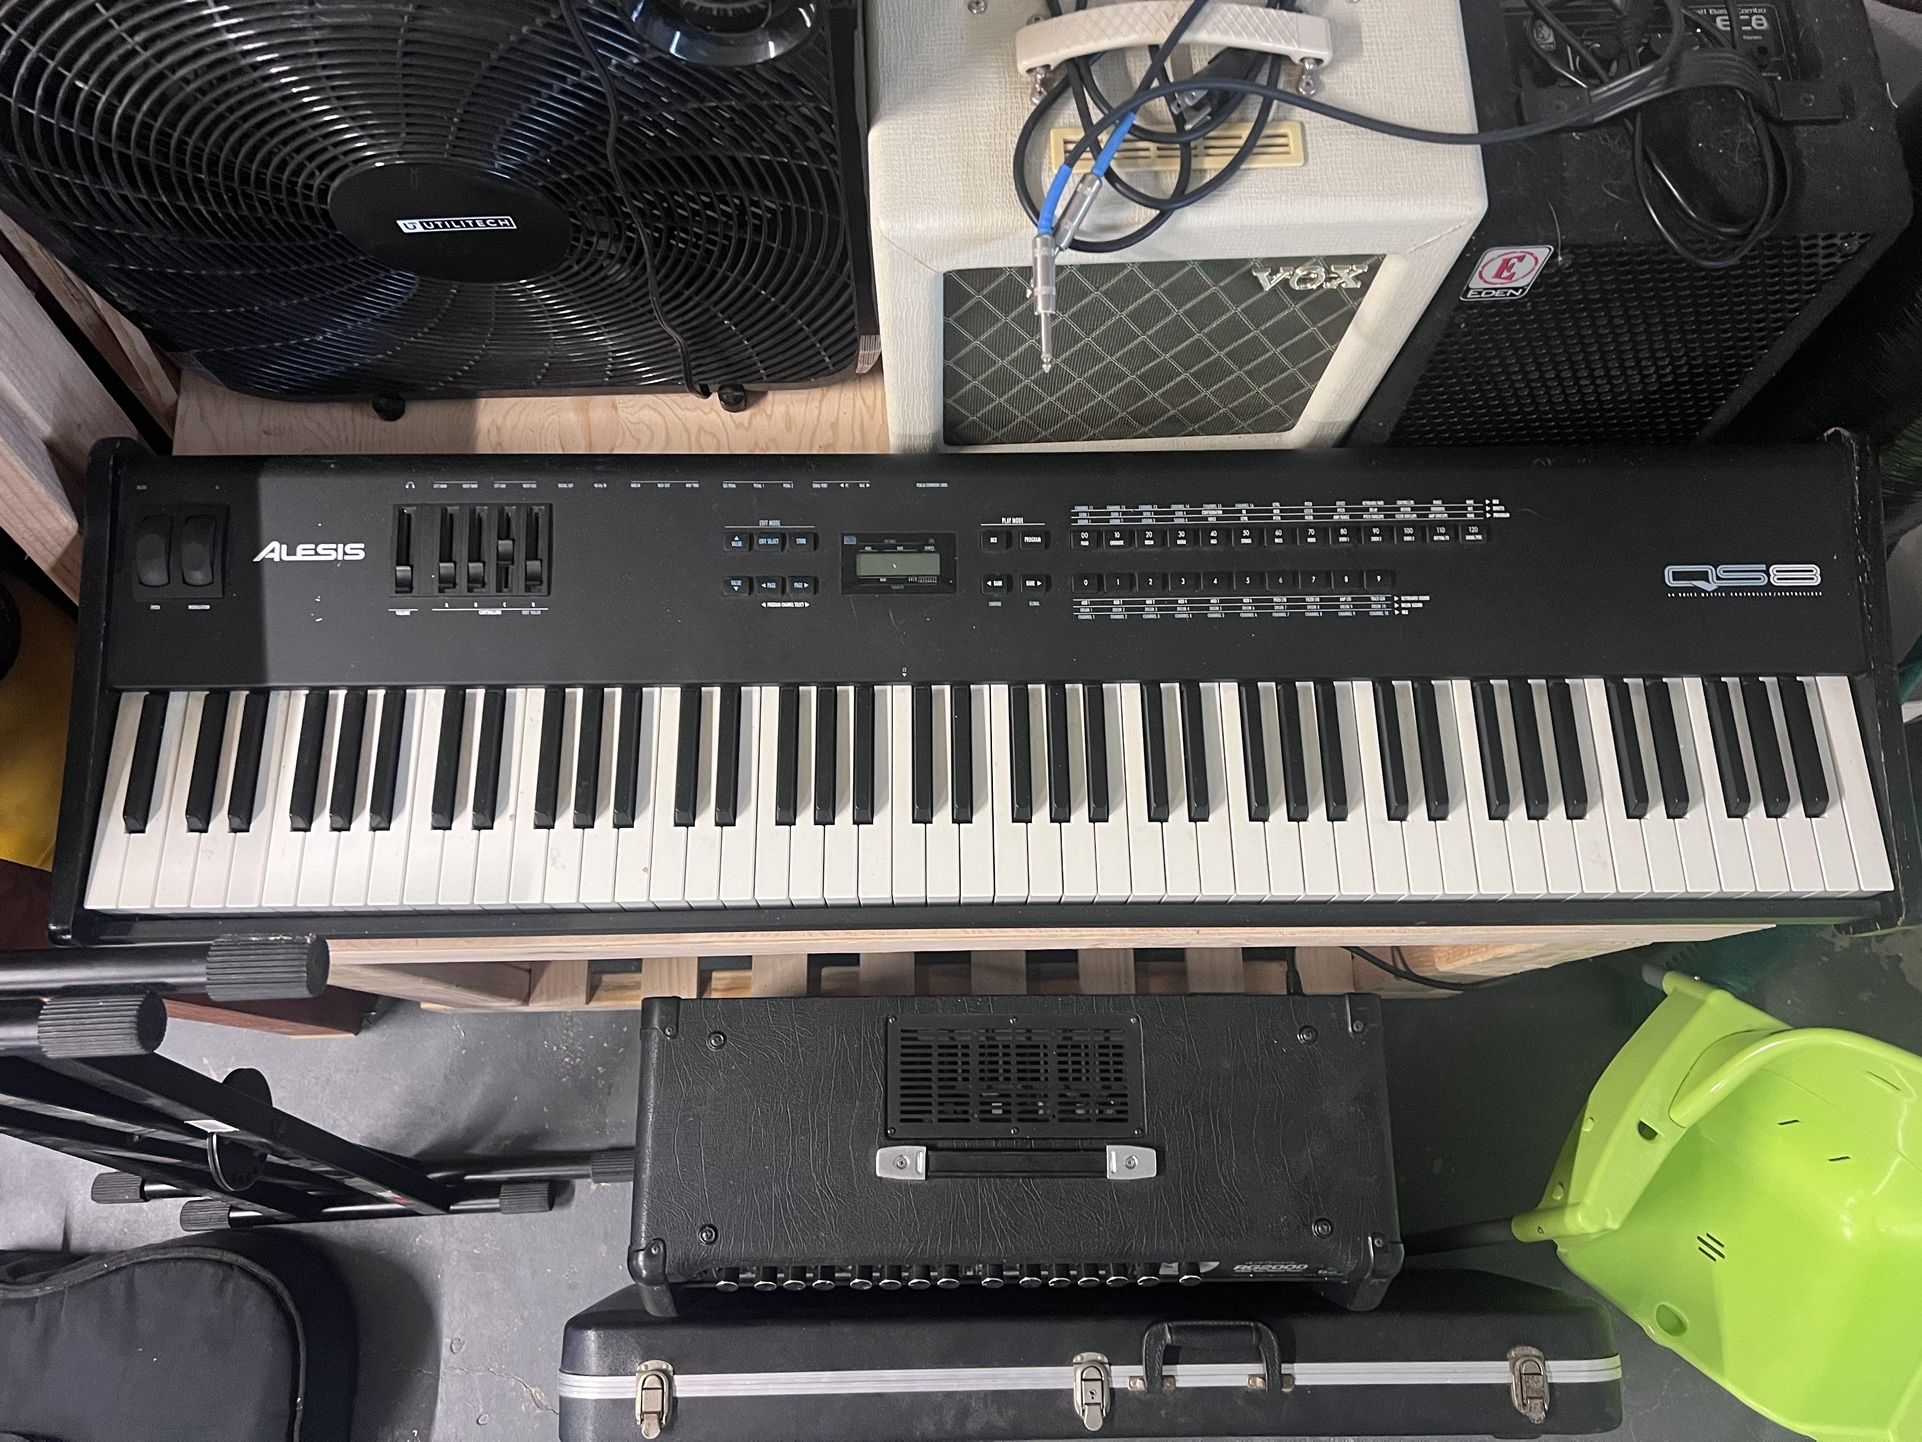 Qs8 64 Voice Master Controller/ Synthesizer Keyboard With Stand